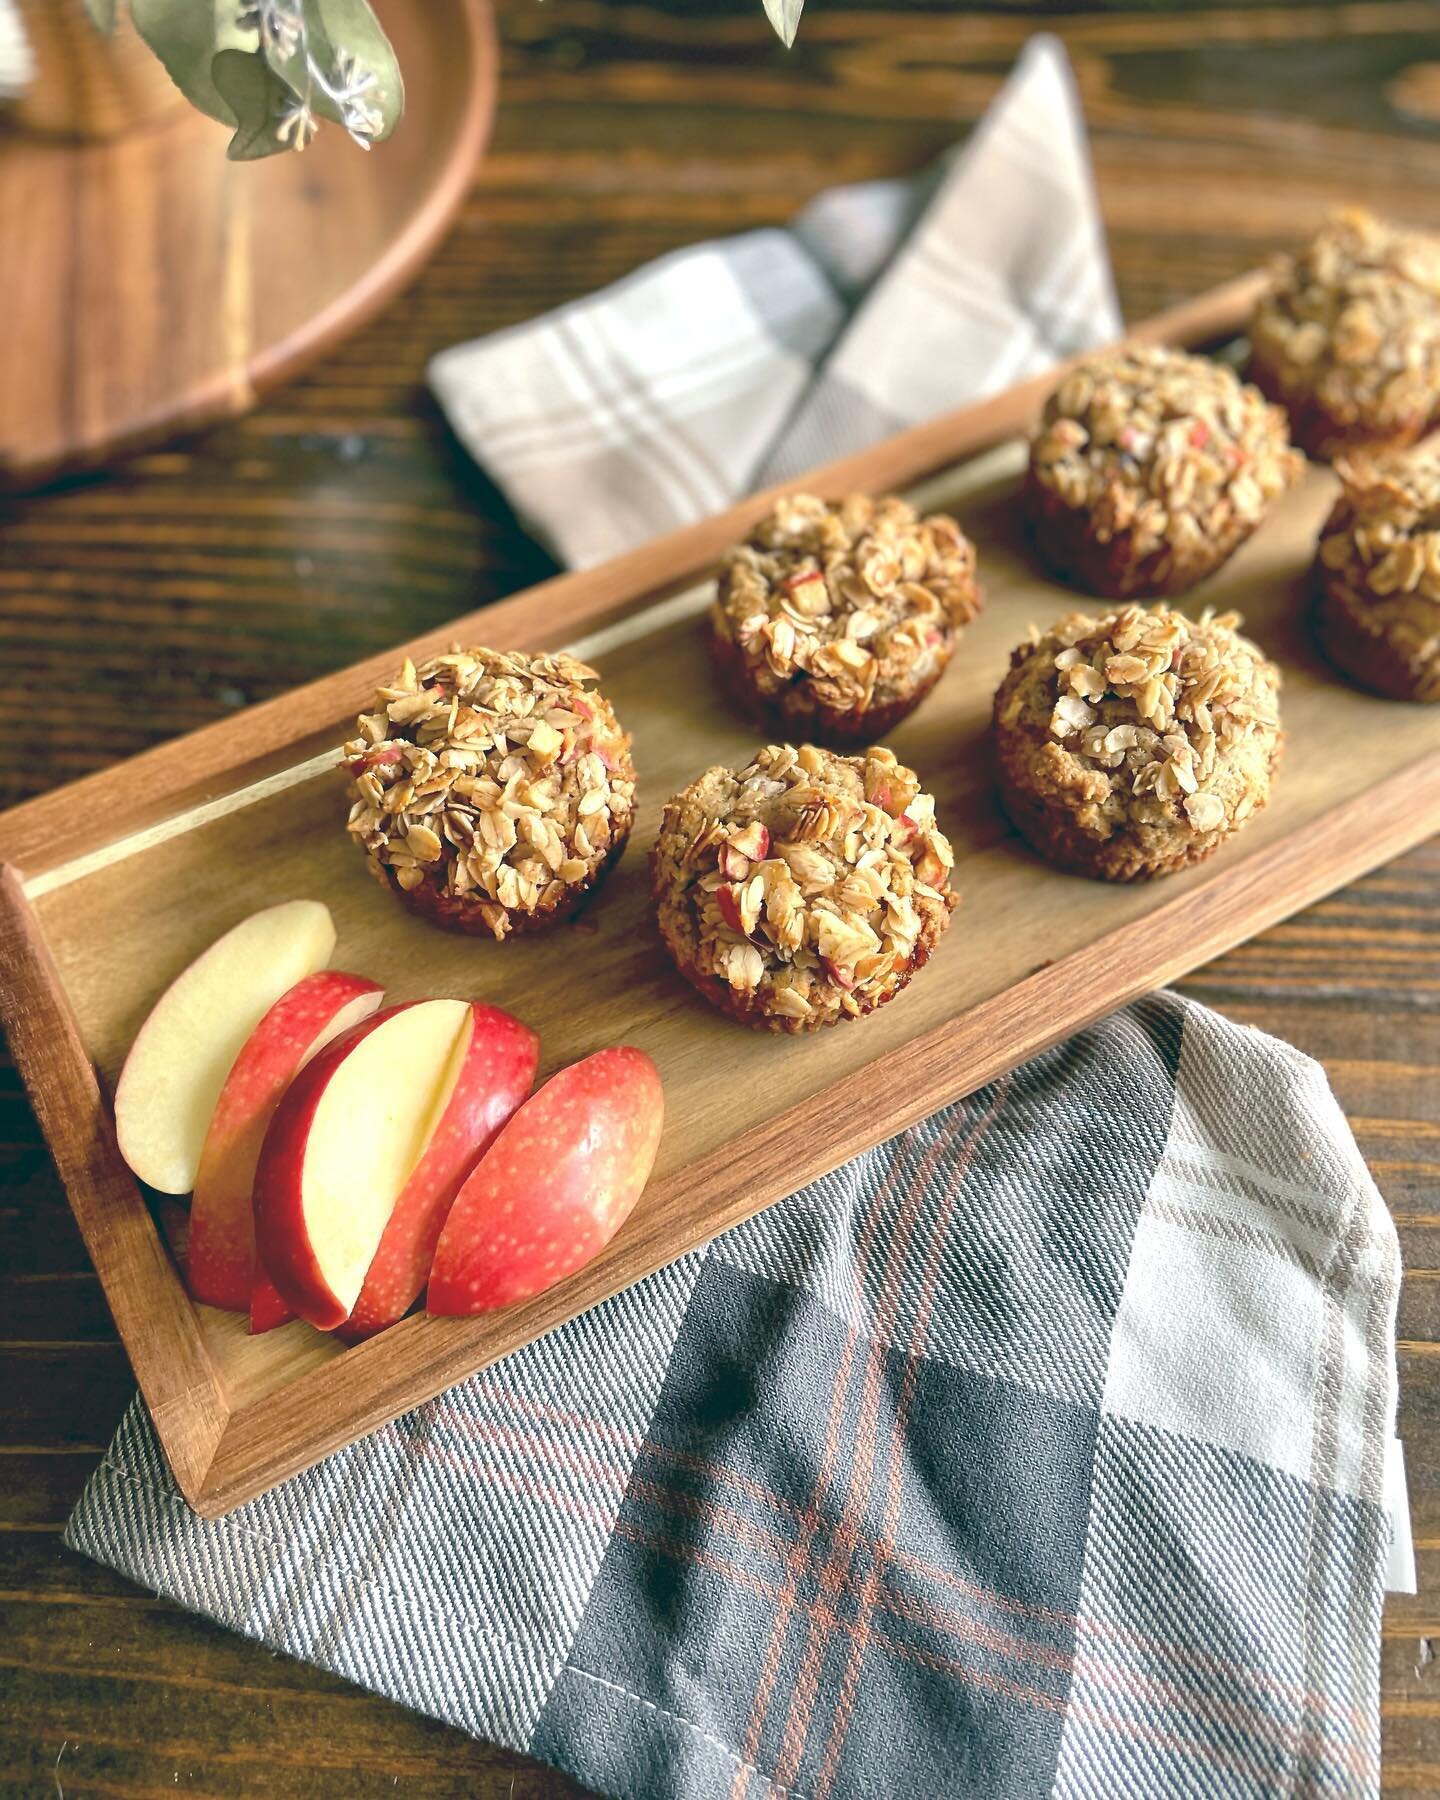 It seems like pumpkin gets most of the attention in the fall, but these apple pie muffins are delicious too! 🍎😋🍂 Are you #teamapple or #teampumpkin ???

Pair with a protein like turkey or chicken sausage links for a blood sugar healthy breakfast. 